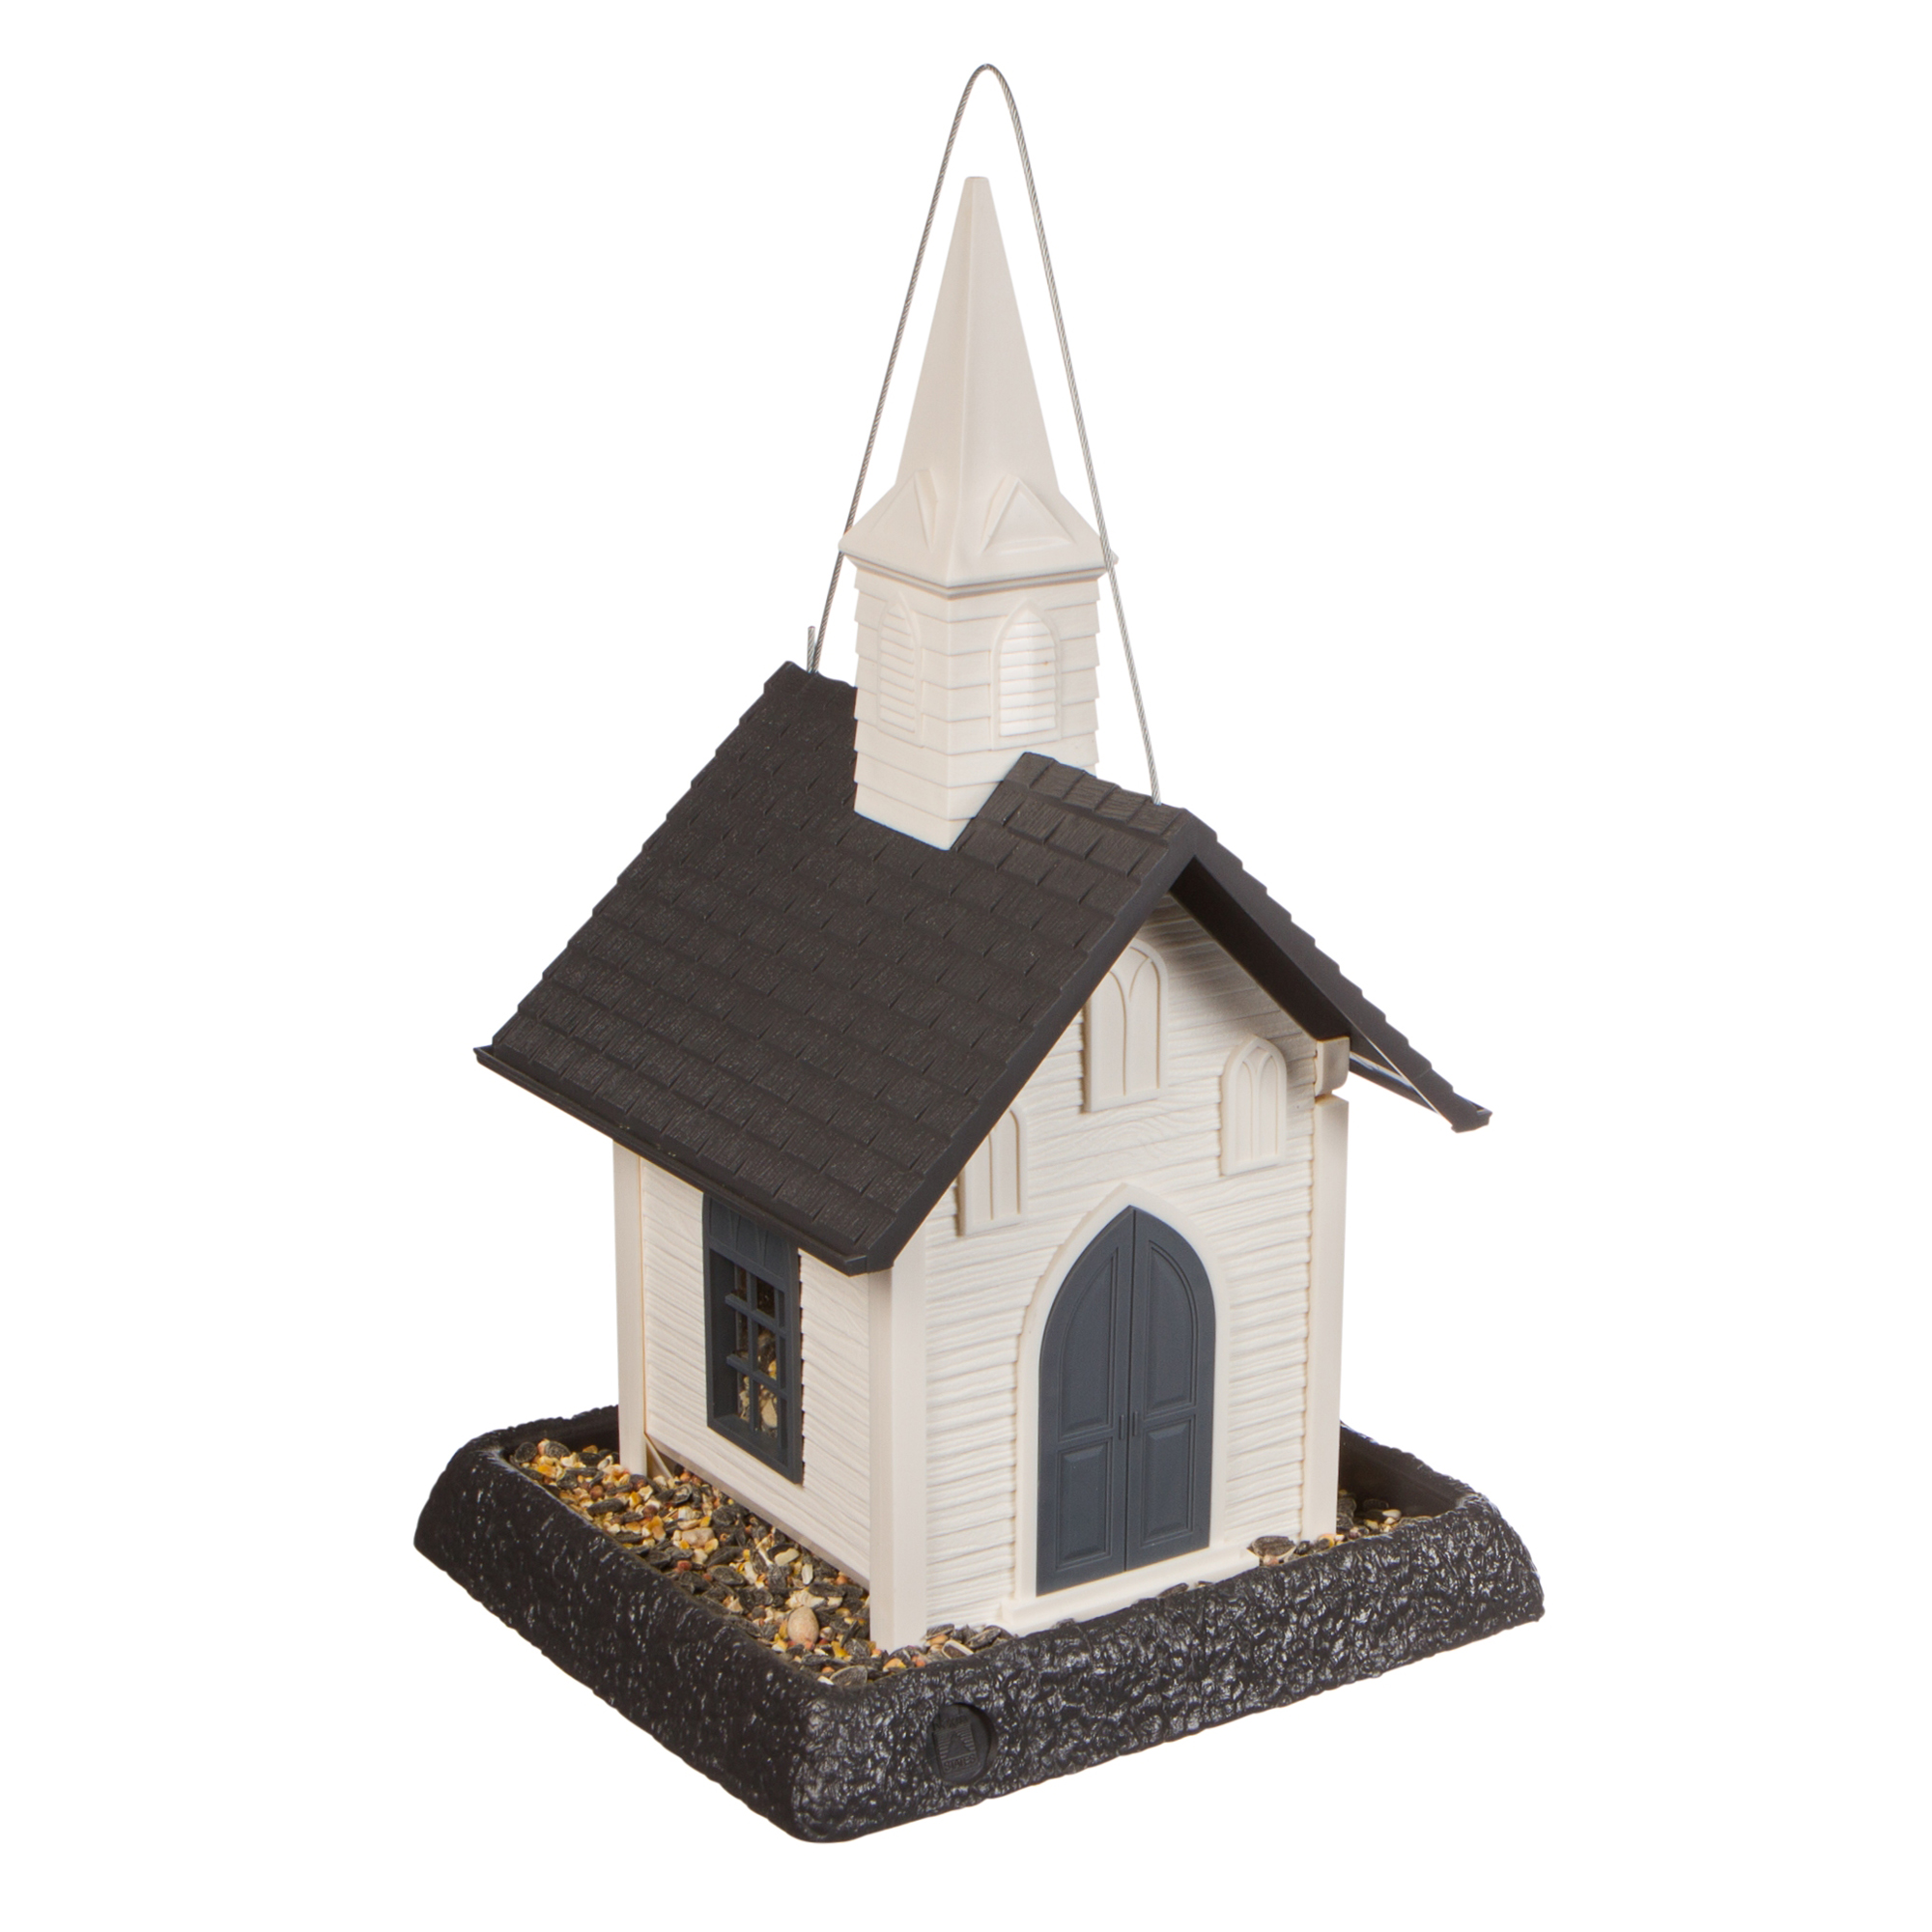 North States Village Collection White and Gray Church Hopper Bird Feeder, 5 lb Capacity - image 1 of 10